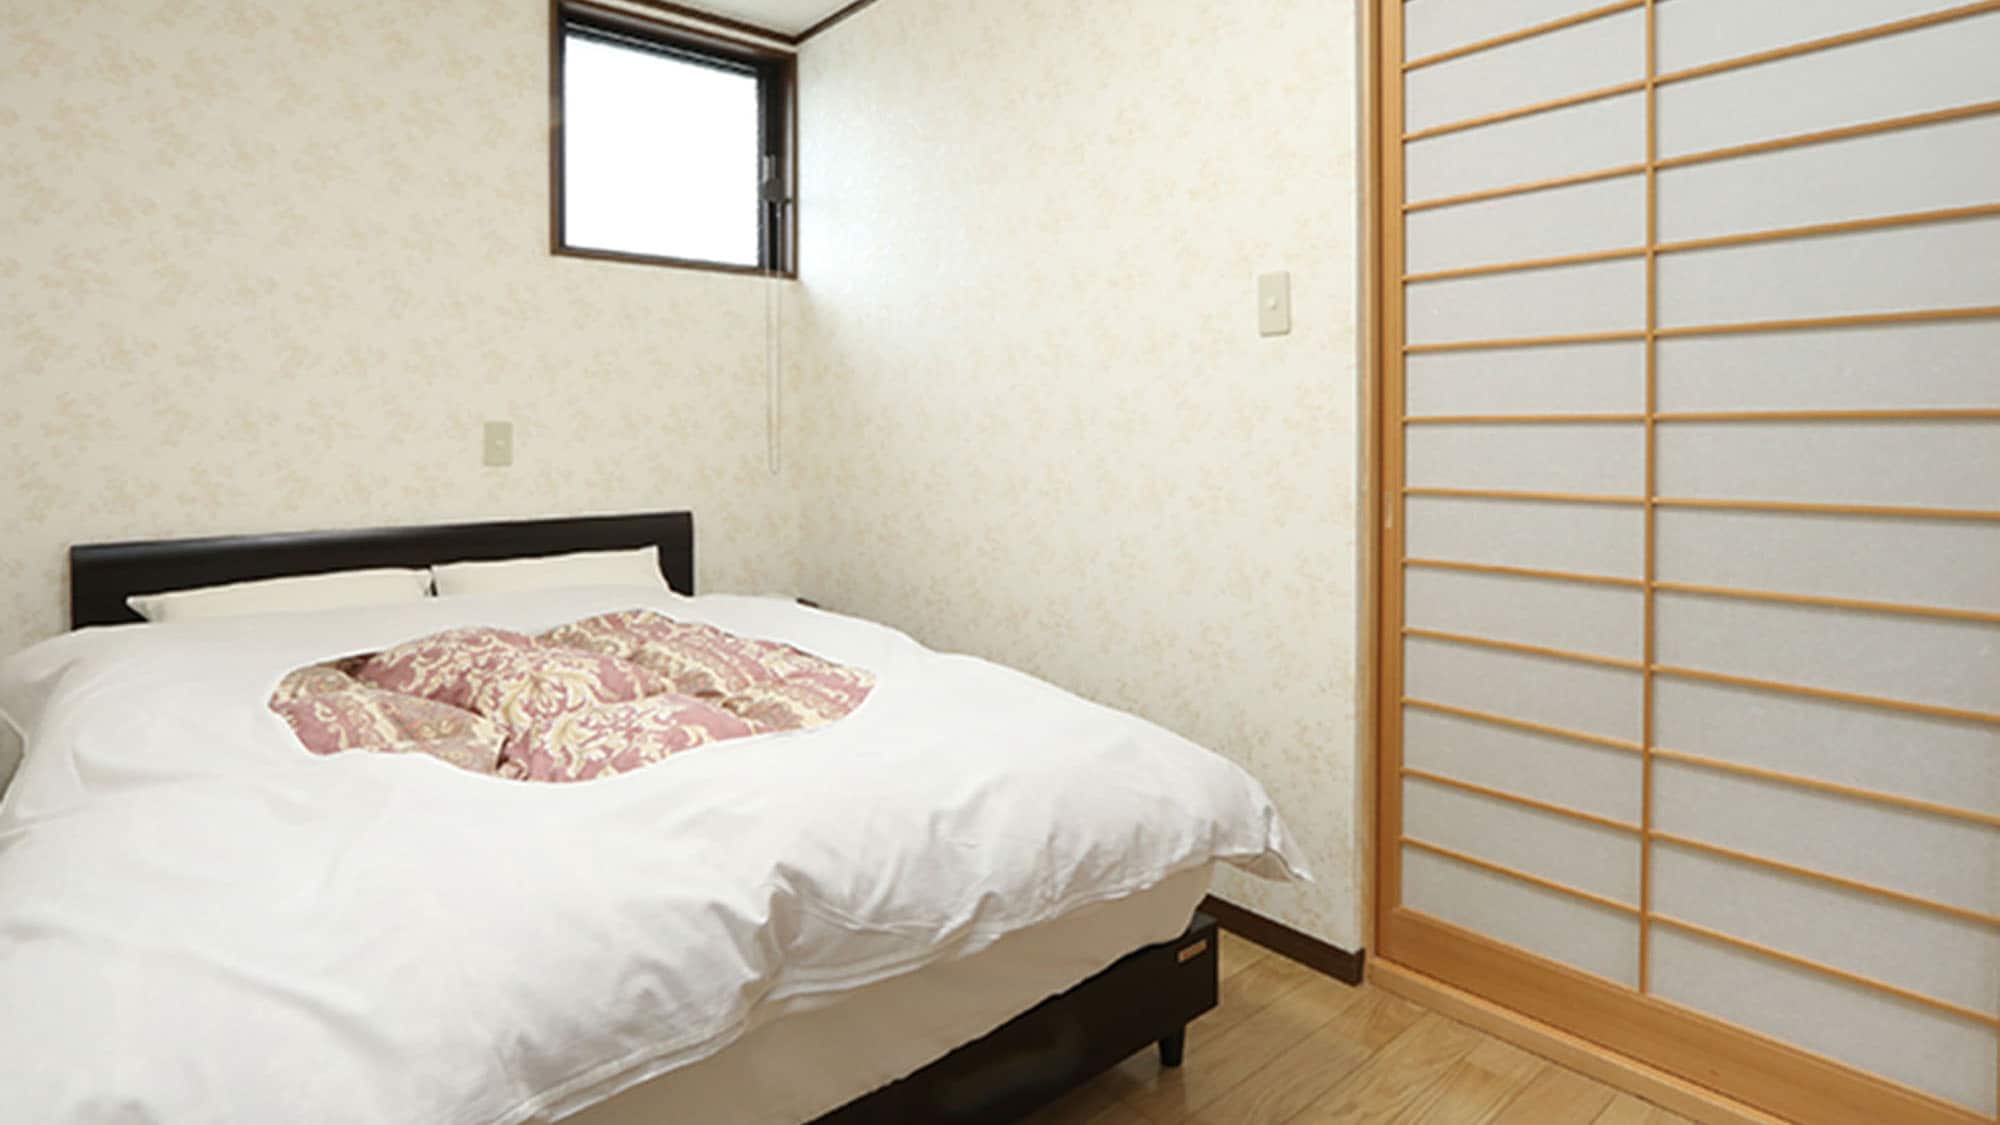 ・ "Sumire / Kaede" room: Up to 3 people can stay